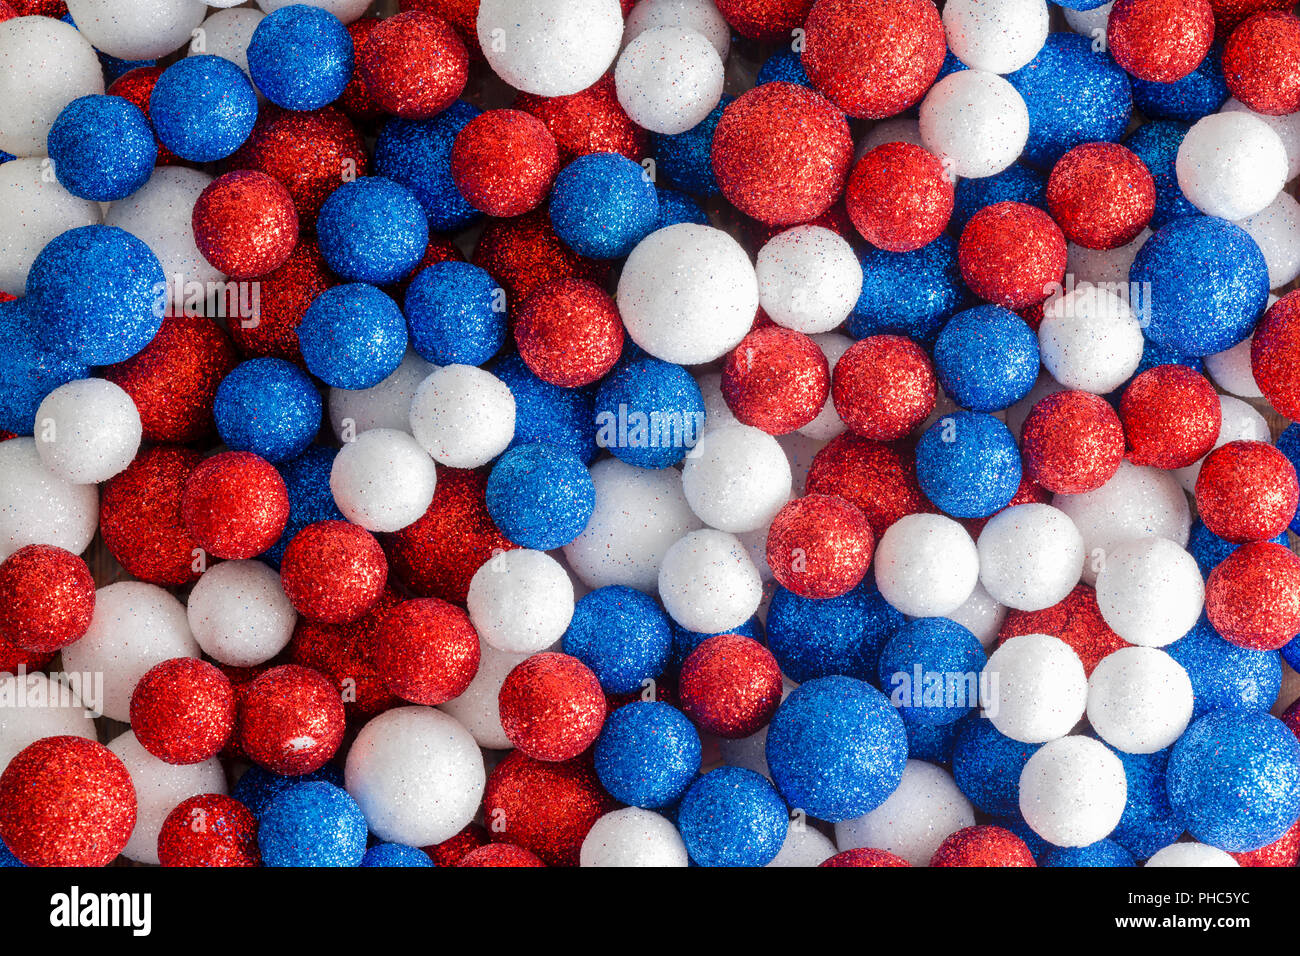 Red white and blue decorative glitter balls in a random mix forming an abstract patriotic American or British background pattern Stock Photo